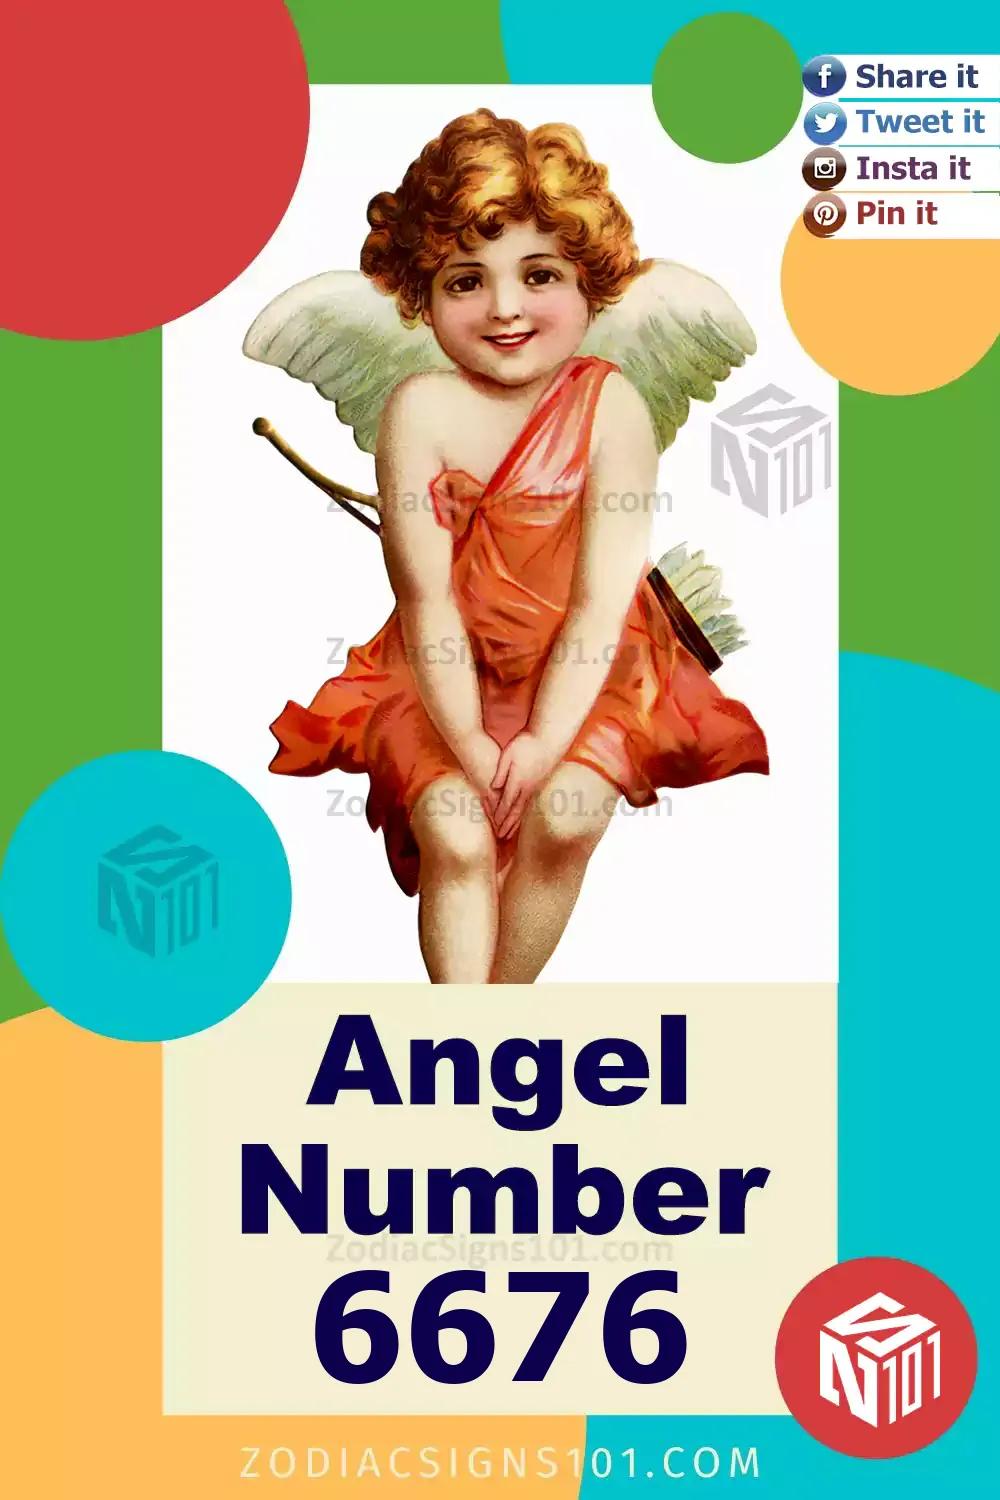 6676 Angel Number Meaning